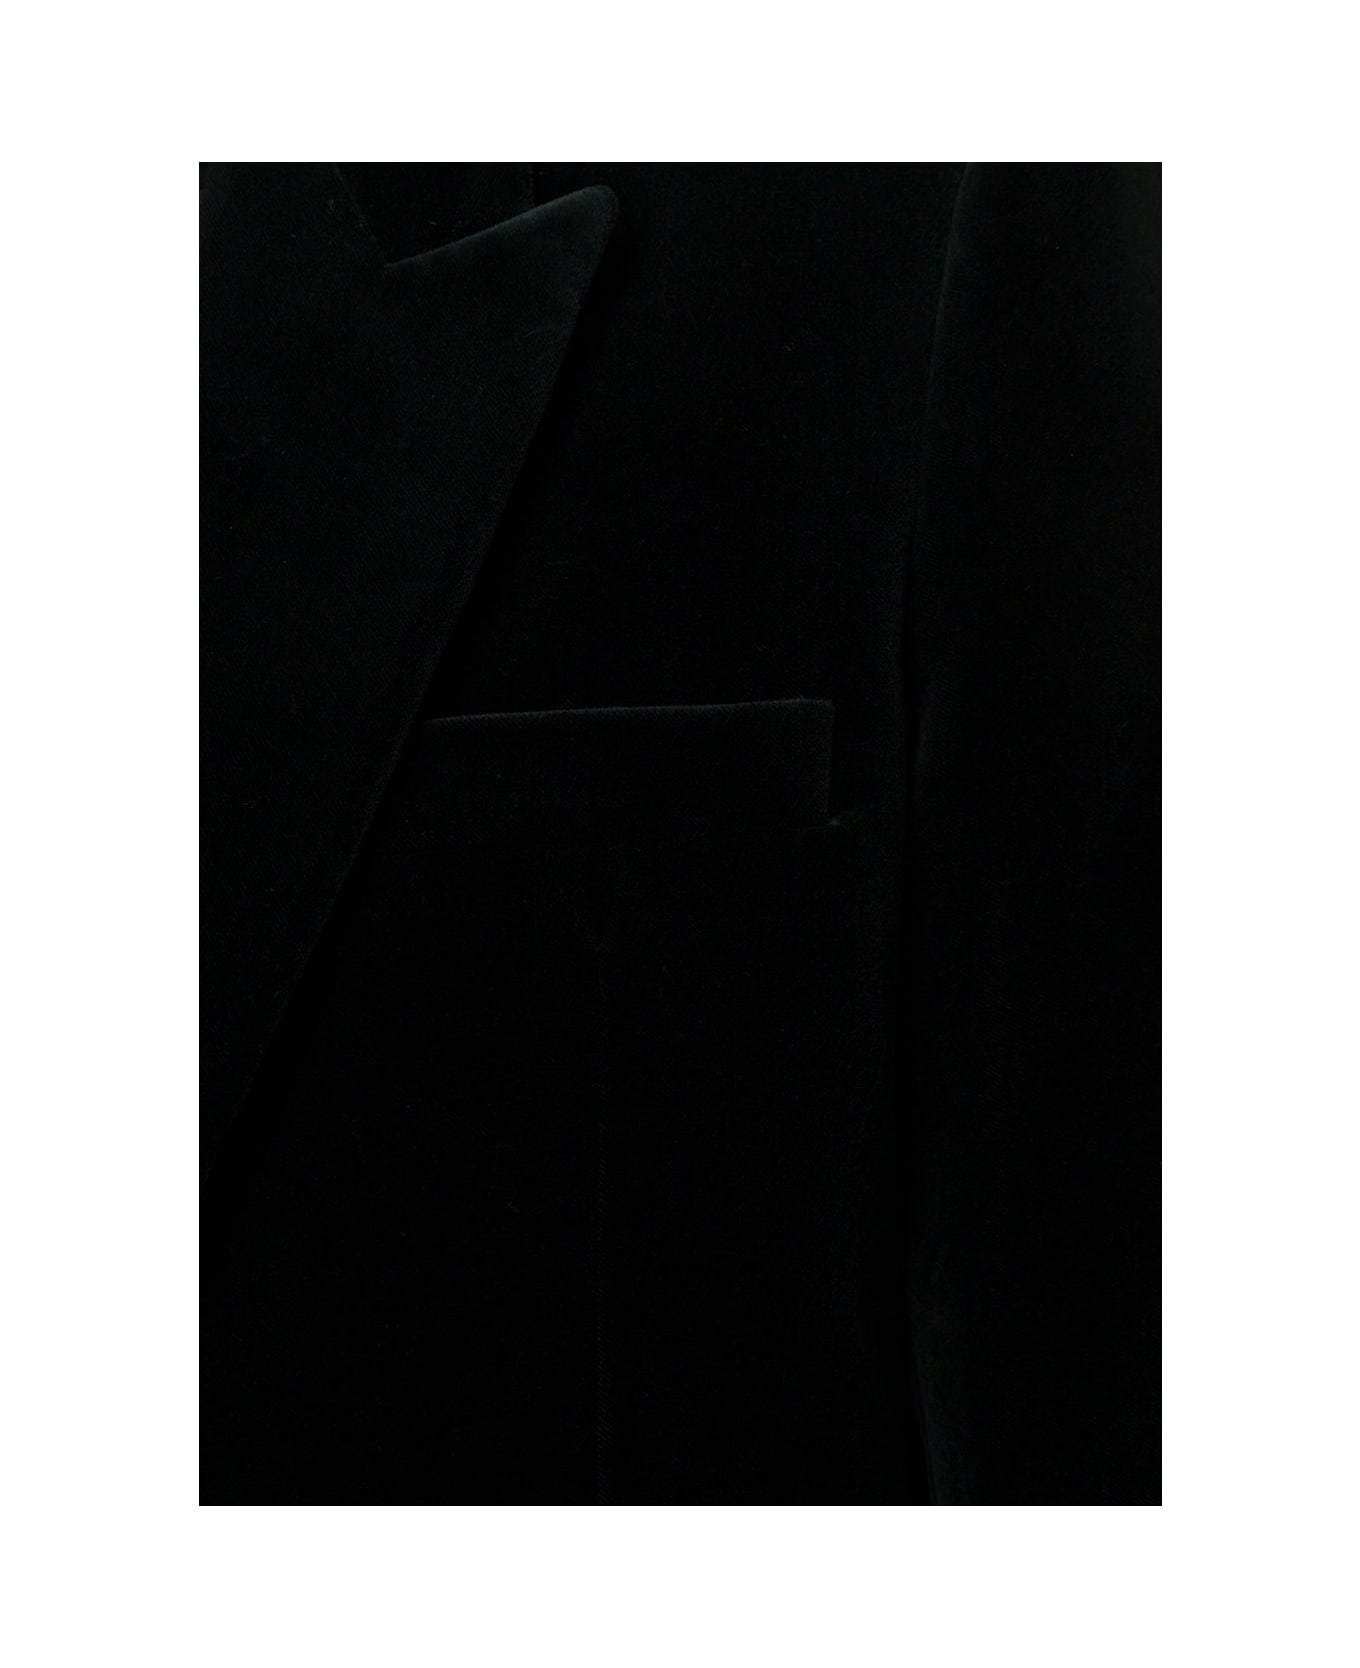 Saint Laurent Single-breasted Jacket With Single Button In Velvet Man - Green